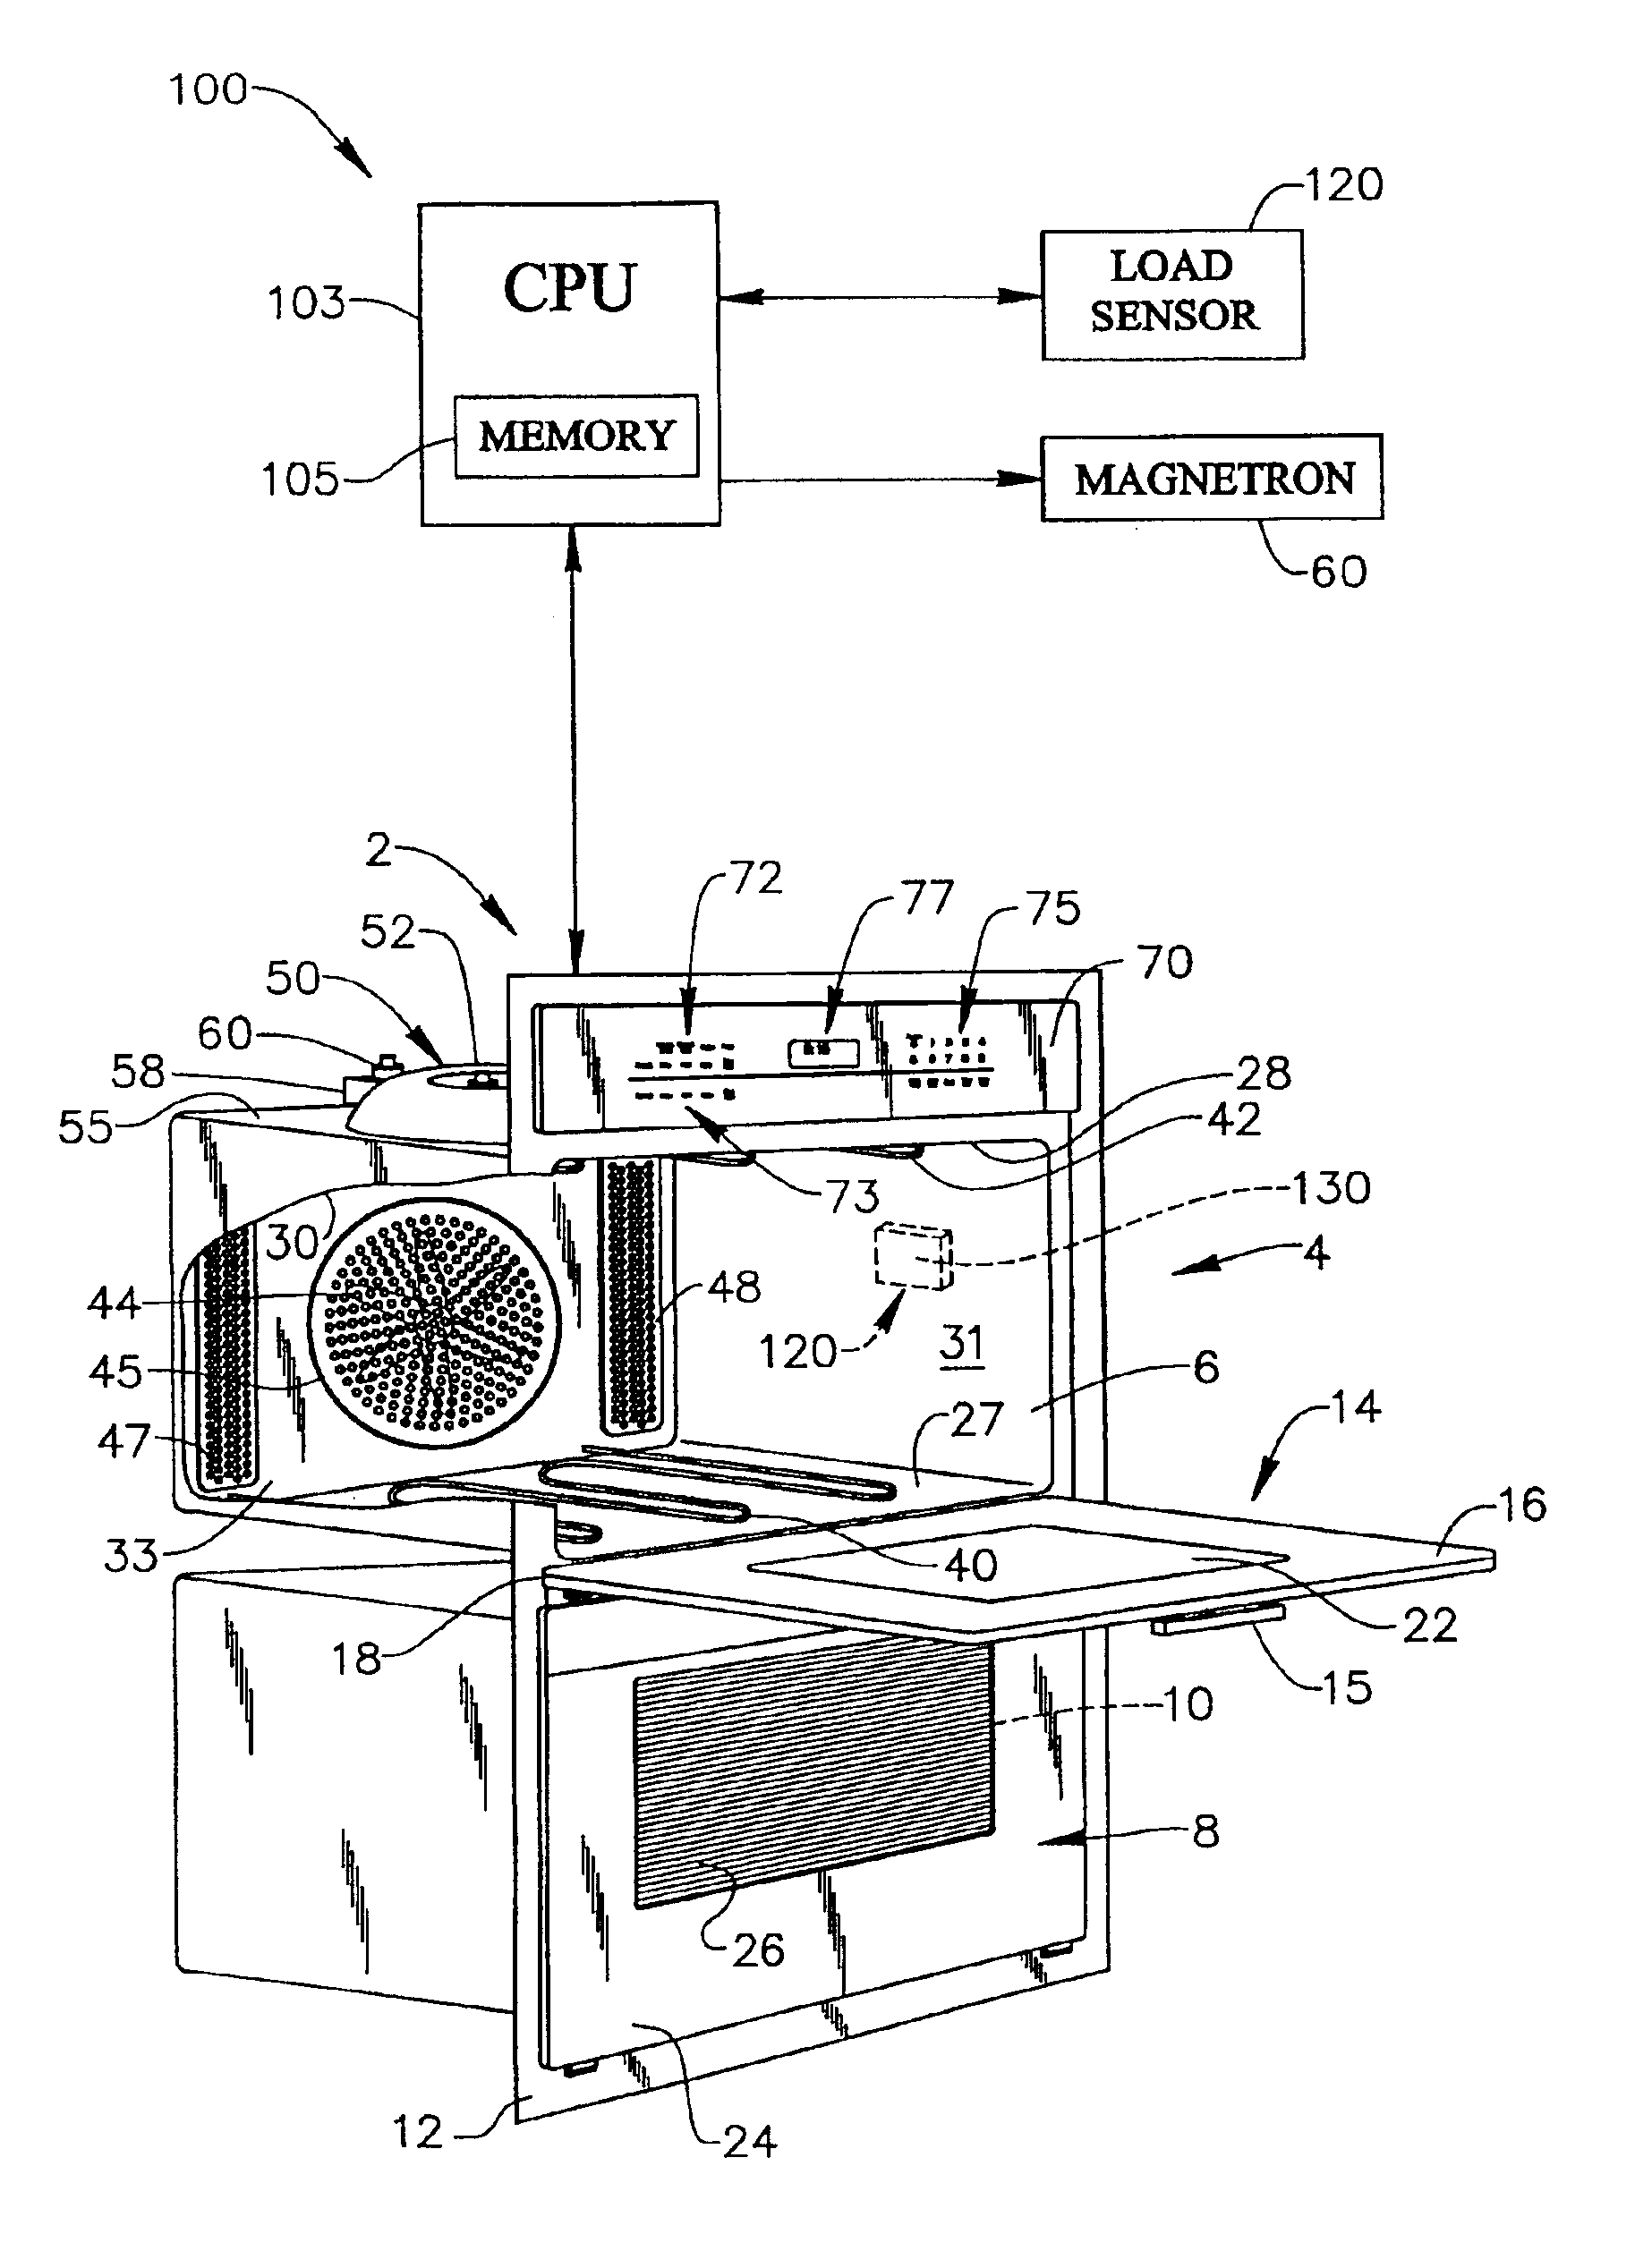 System for sensing the presence of a load in an oven cavity of a microwave cooking appliance